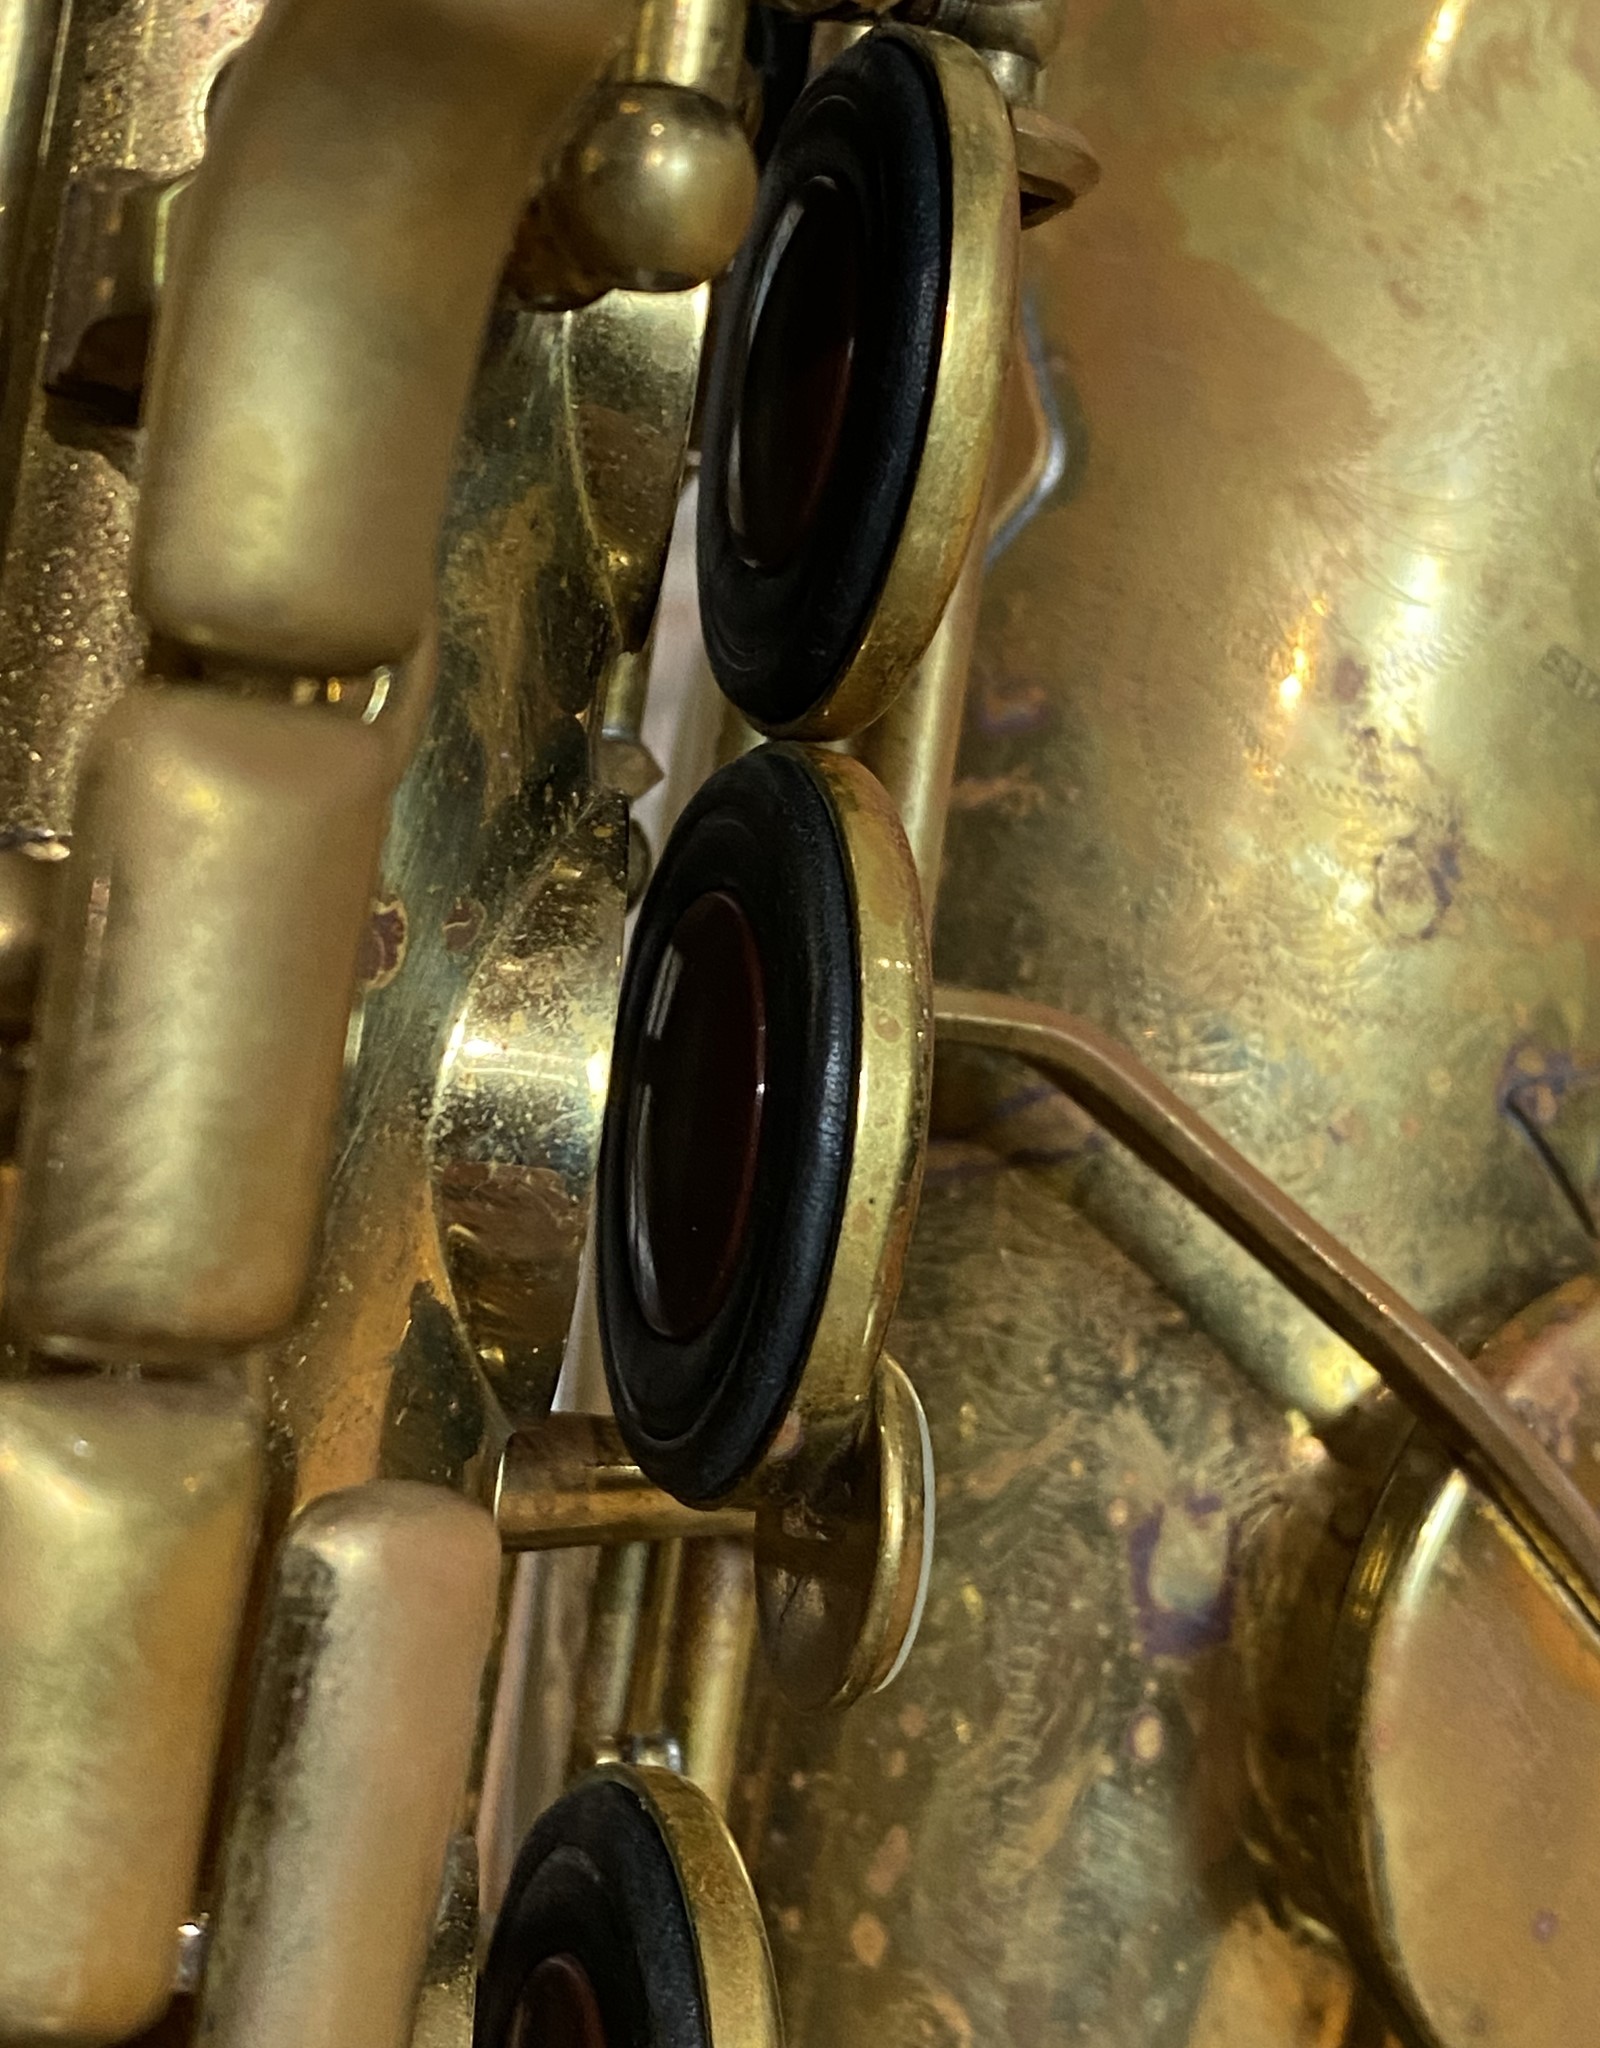 Bobby Watson’s Yamaha 82 Z Alto Saxophone with Black Roo Overhaul Gold Plated Neck Hand Selected